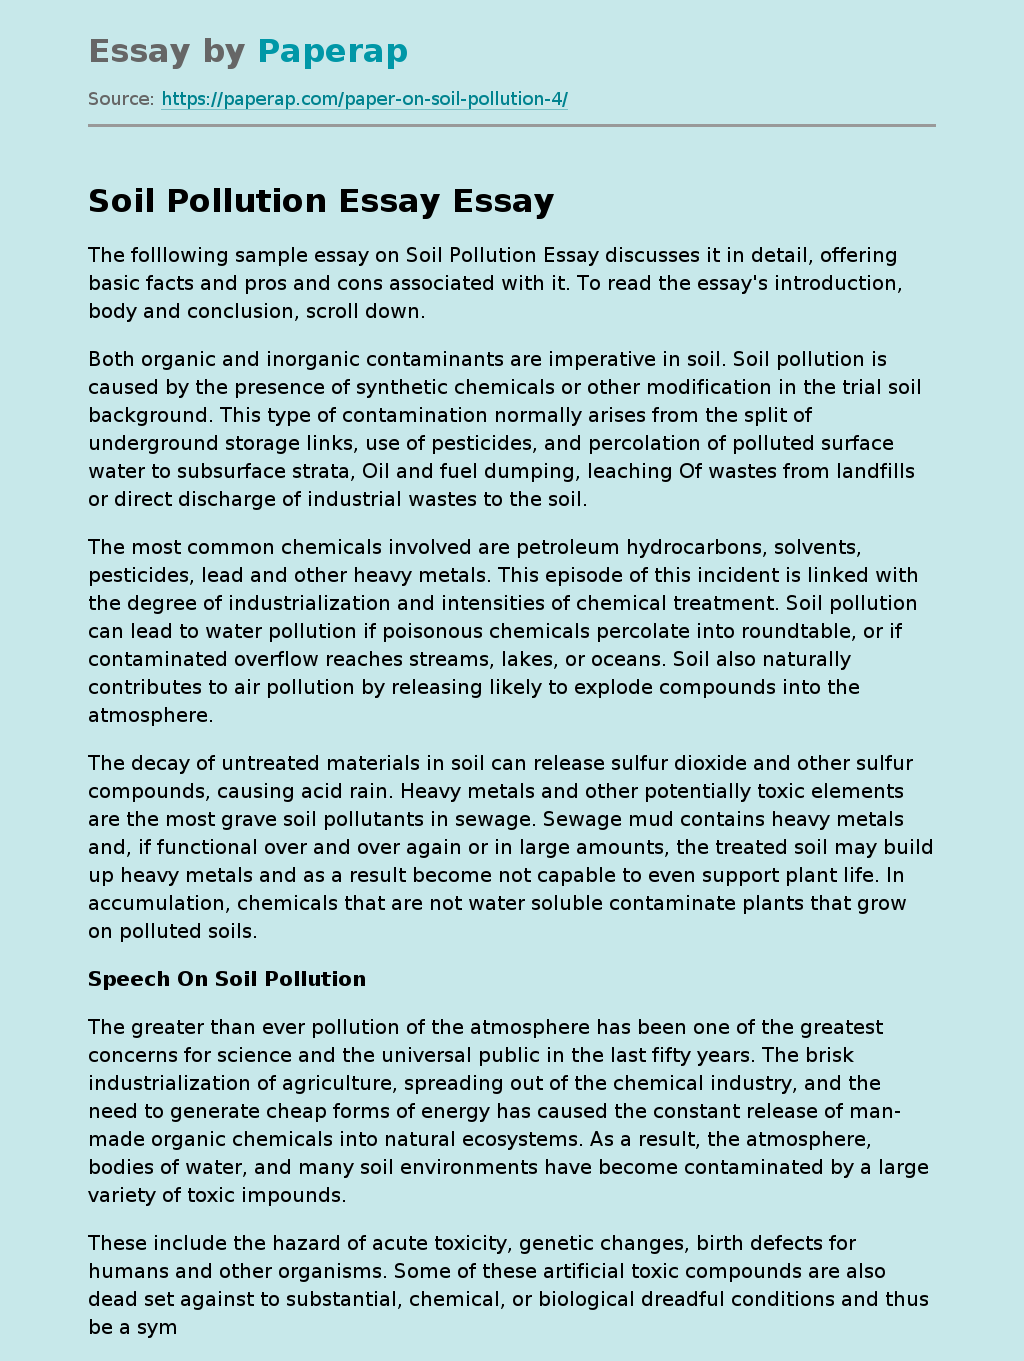 soil pollution essay in 300 words